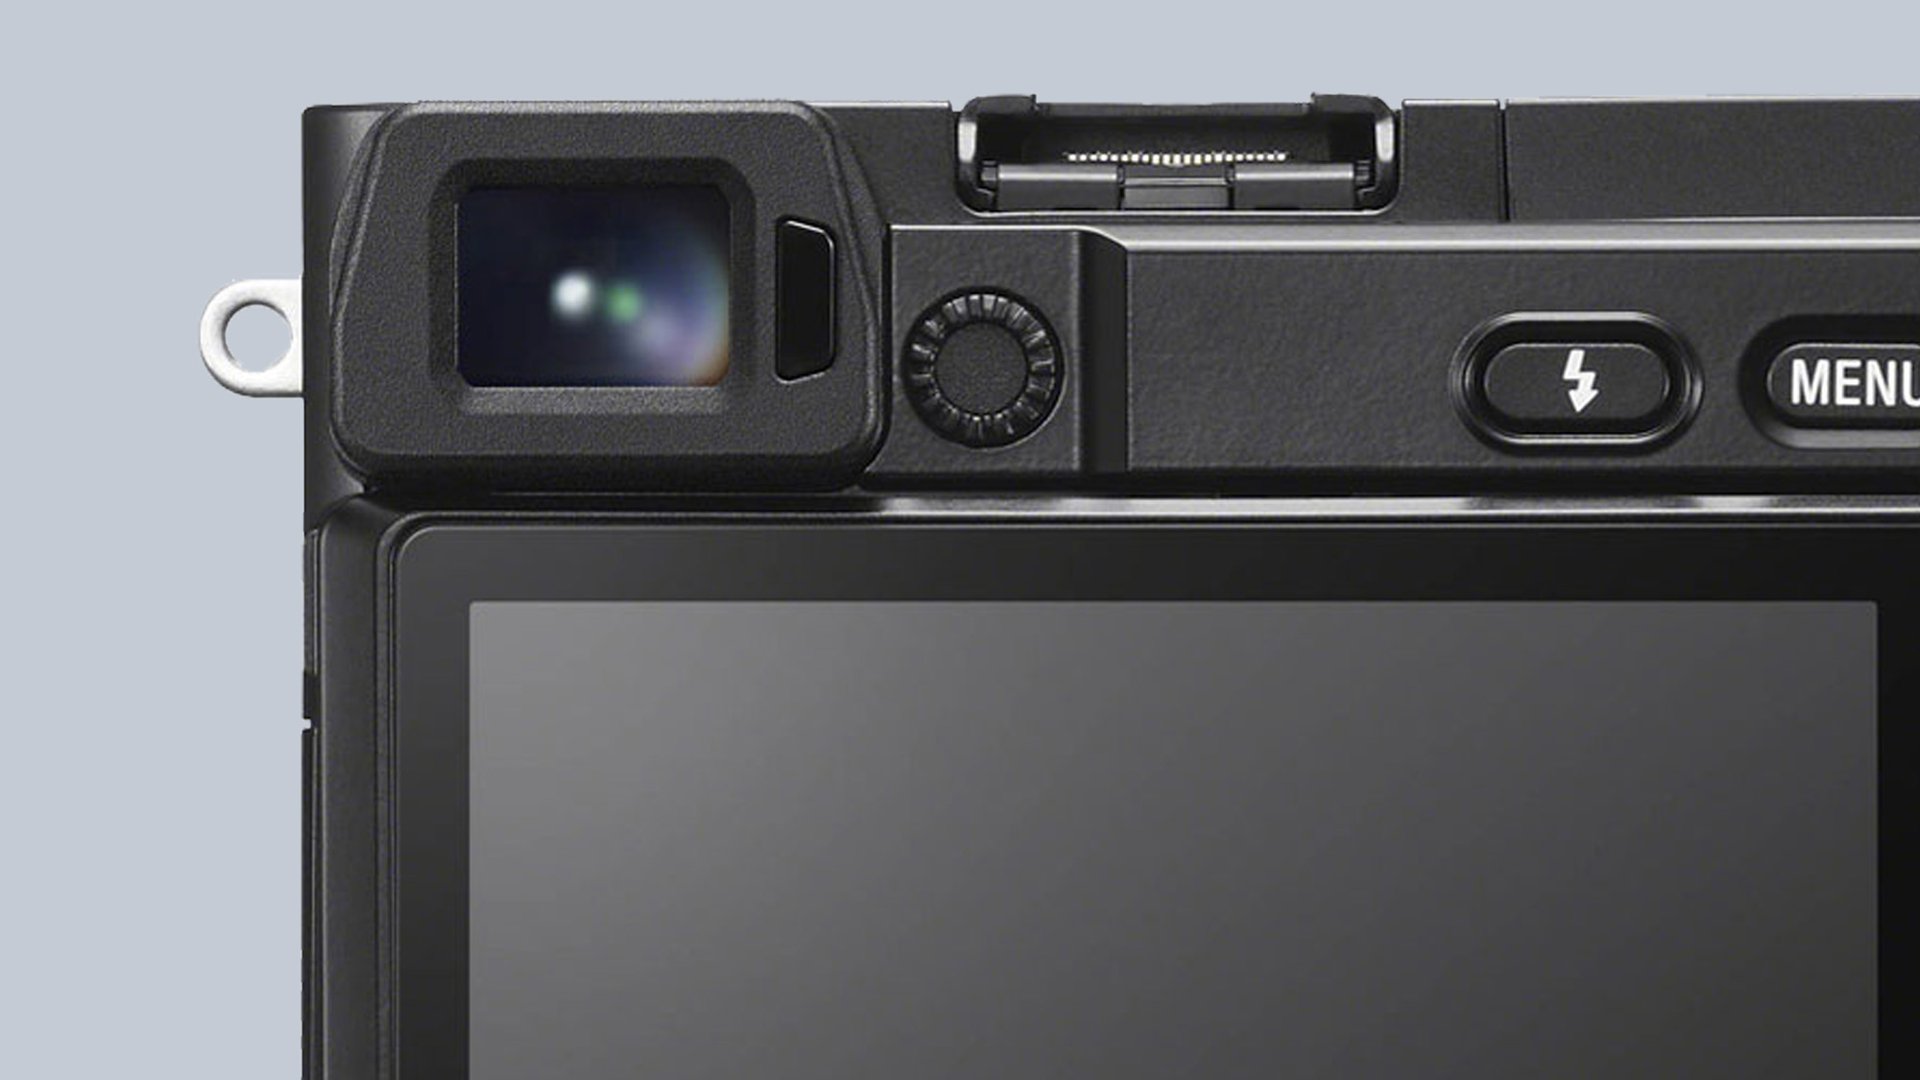 The viewfinder of the Sony A6100 camera